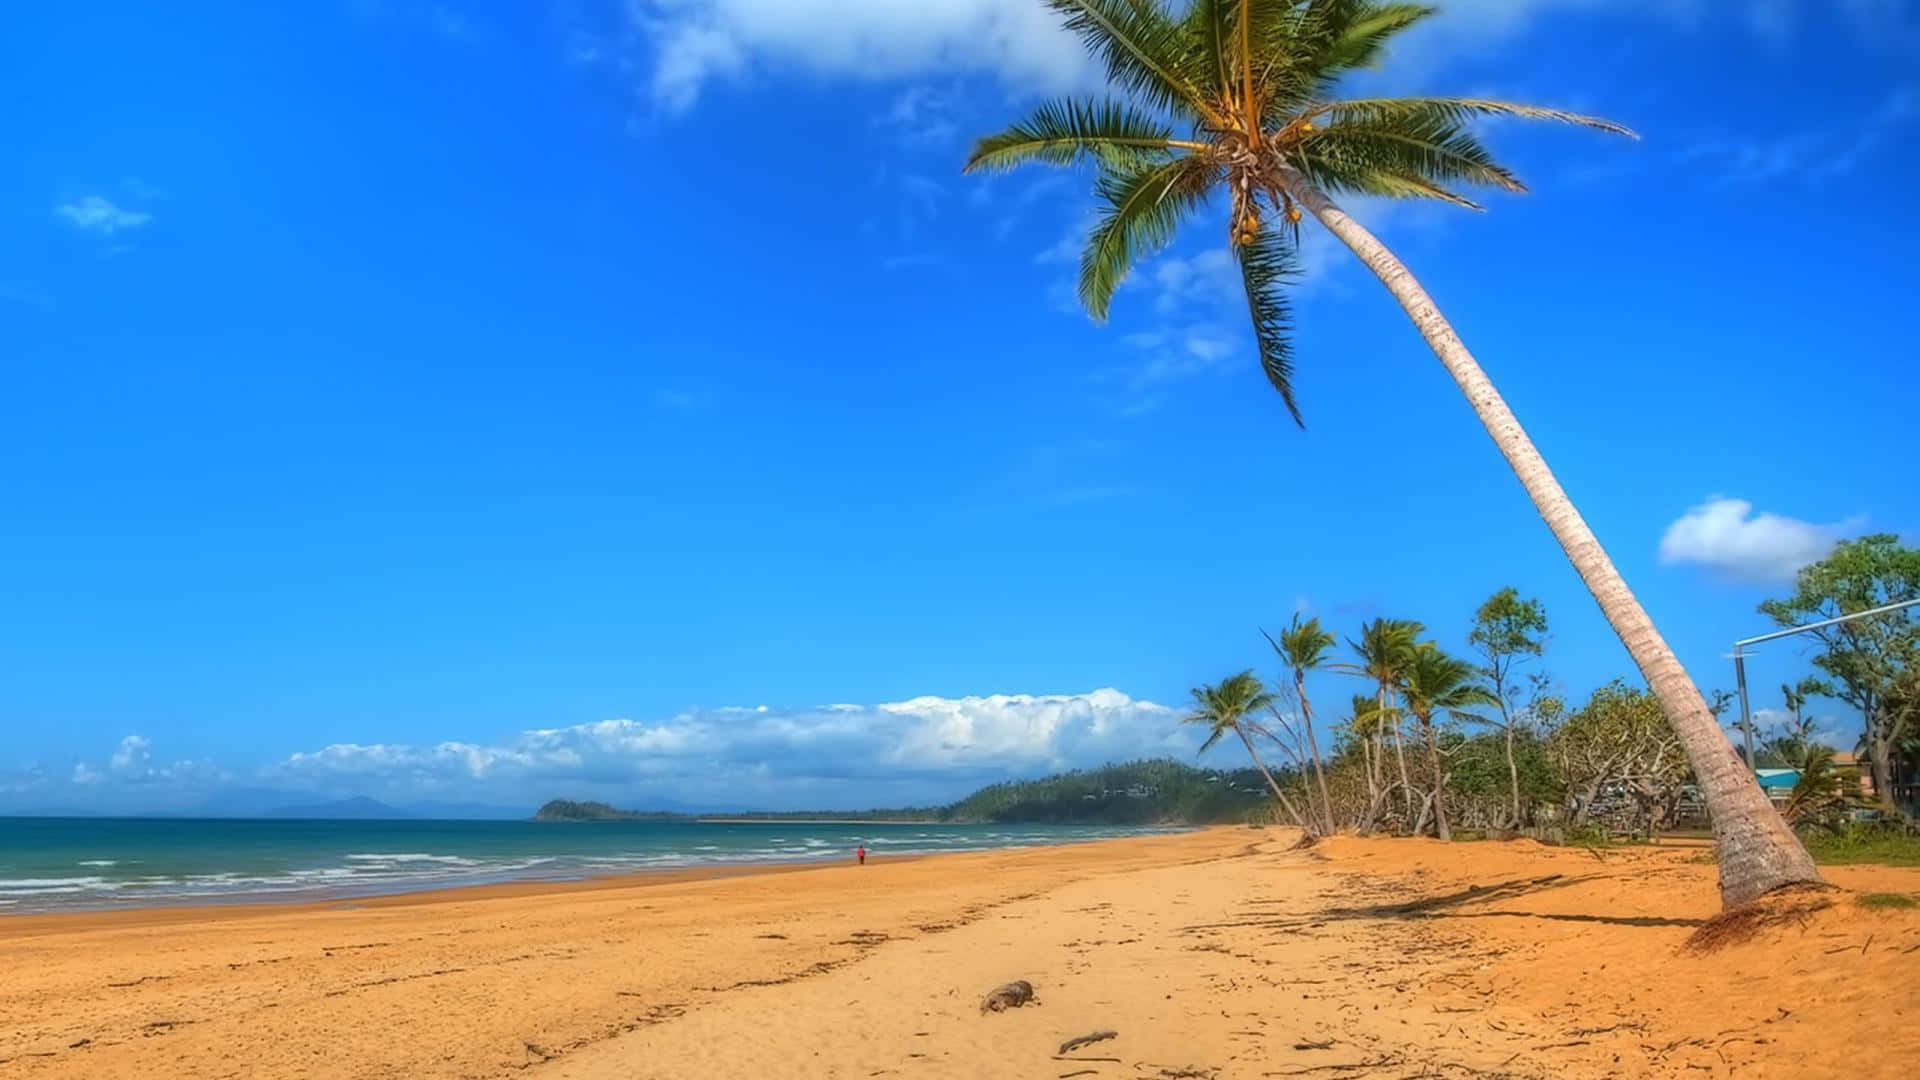 Tropical_ Beach_ Scene_with_ Palm_ Tree Wallpaper